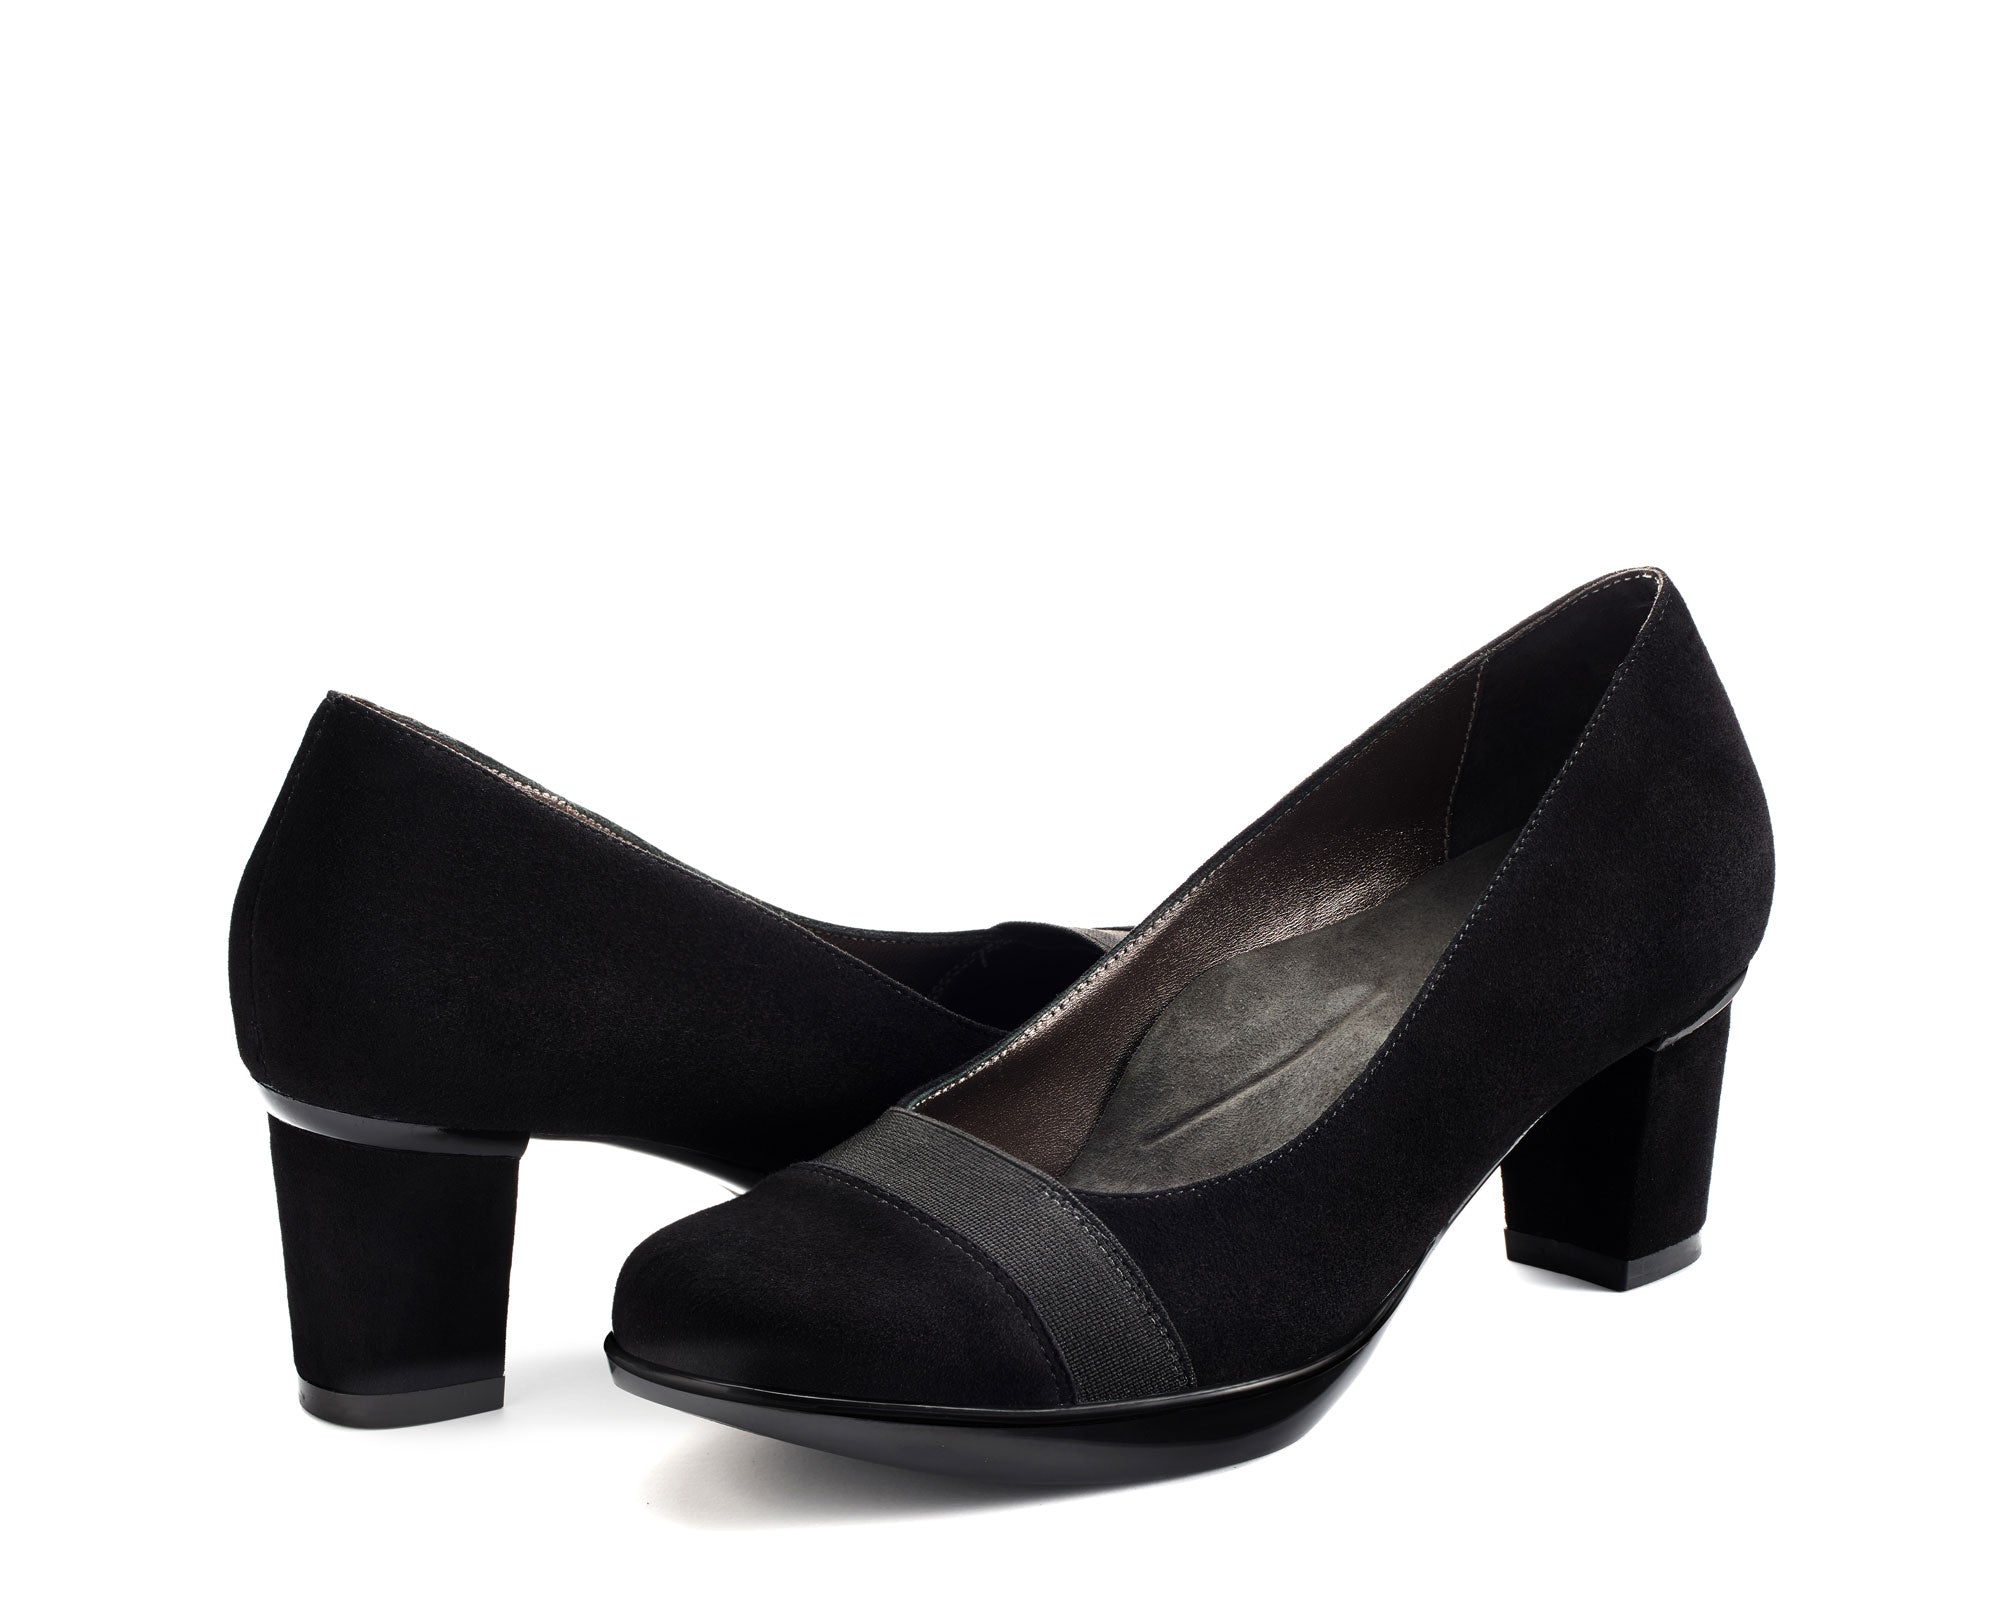 Black Suede Court Shoe with Ankle Strap | SilkFred